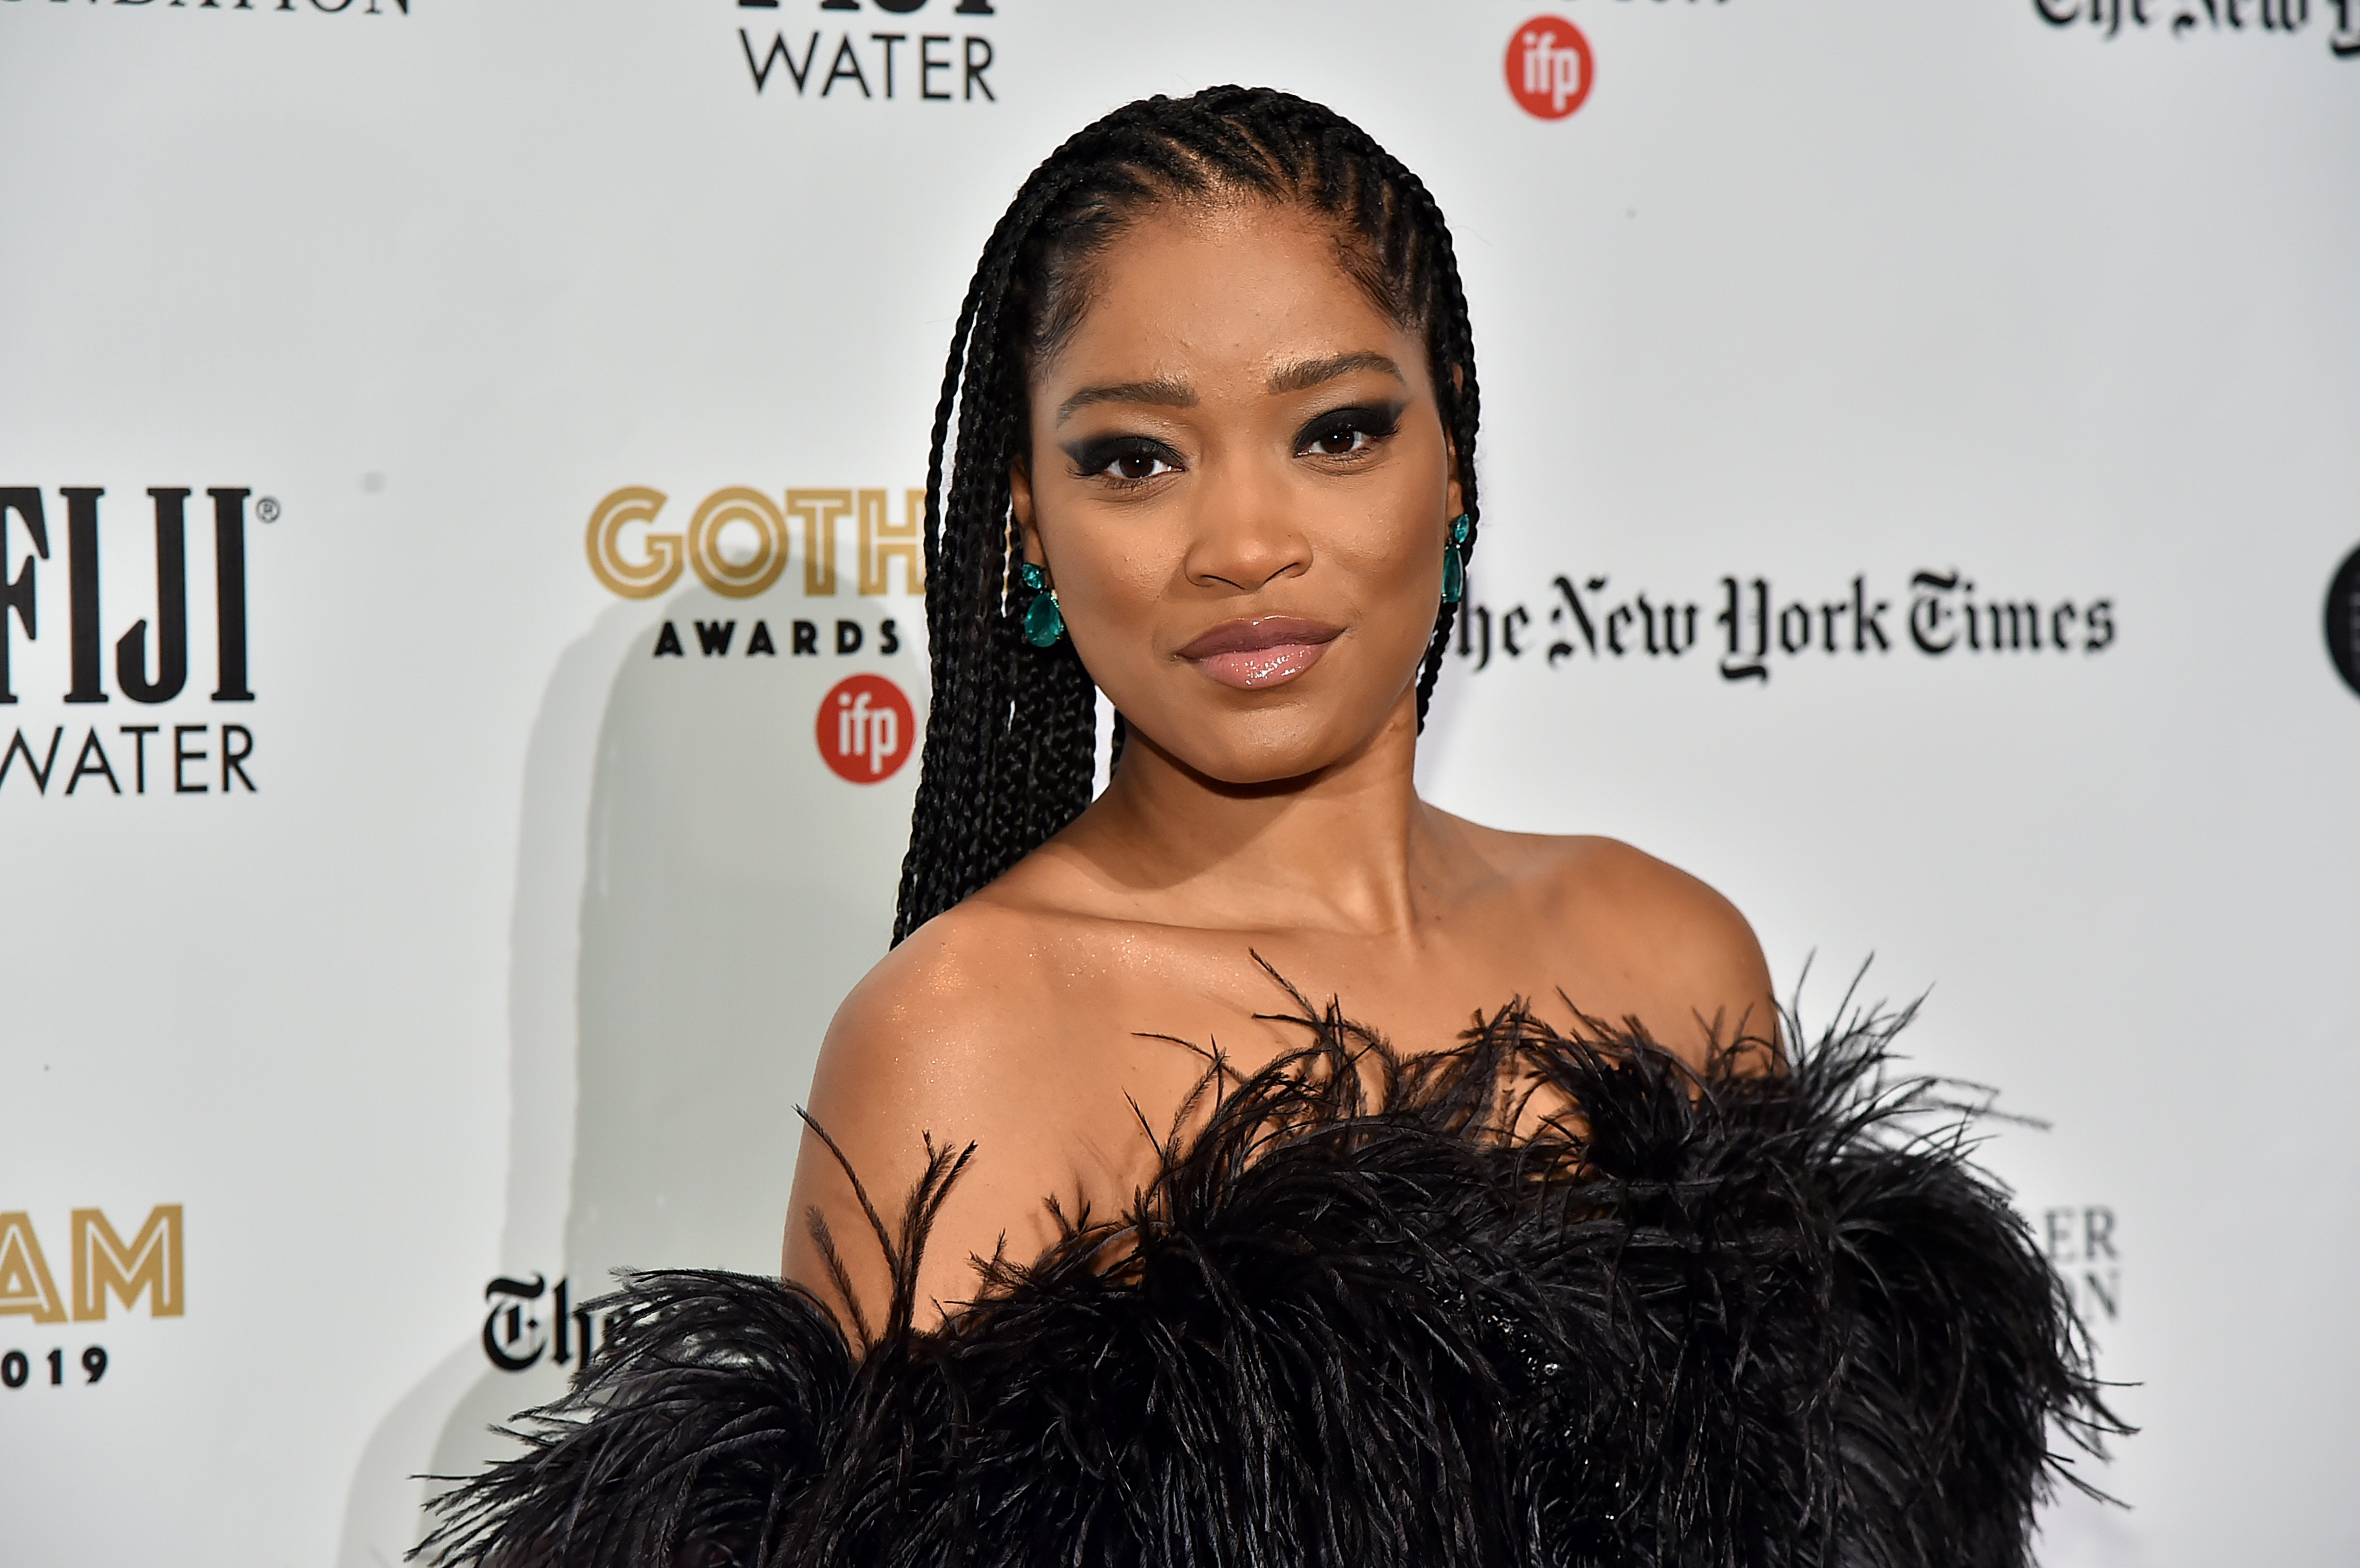  Keke Palmer at the IFP's 29th Annual Gotham Independent Film Awards on December 02, 2019 in New York City. | Source: Getty Images